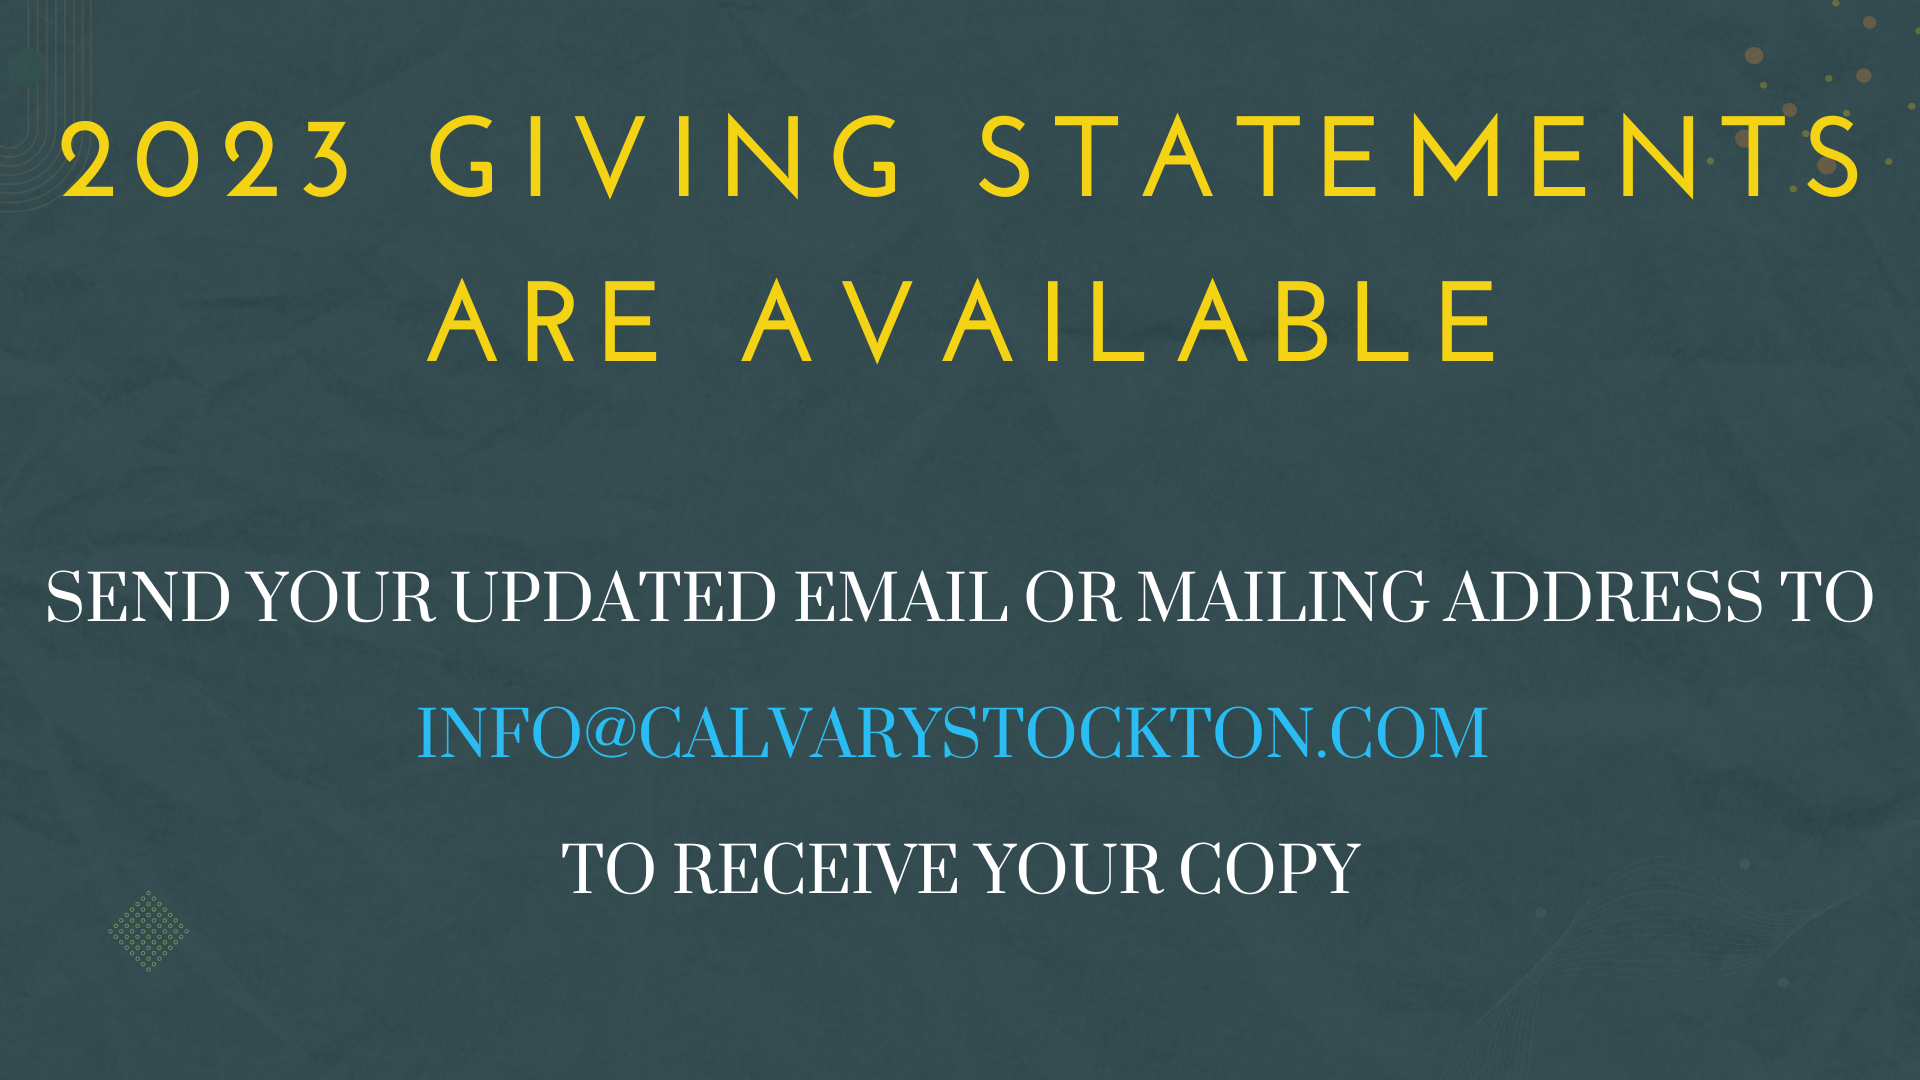 2023 giving statements are available, send your updated email or mailing address to info@calvarystockton.com to receive your copy.